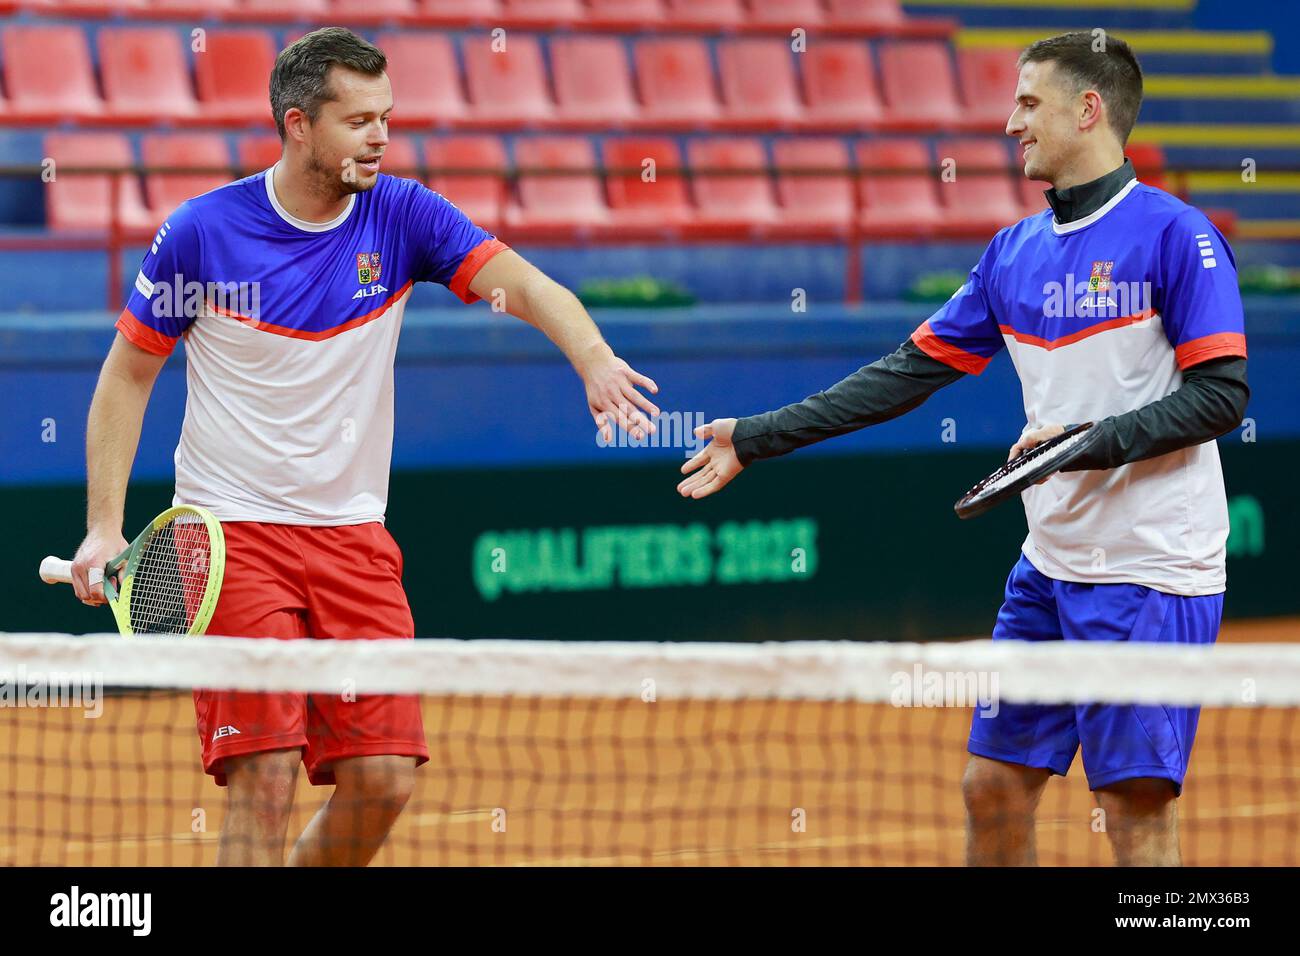 From left tennis player Adam Pavlasek and Vit Kopriva of Czech team in  action during the training session prior to the Davis Cup tennis tournament  qua Stock Photo - Alamy